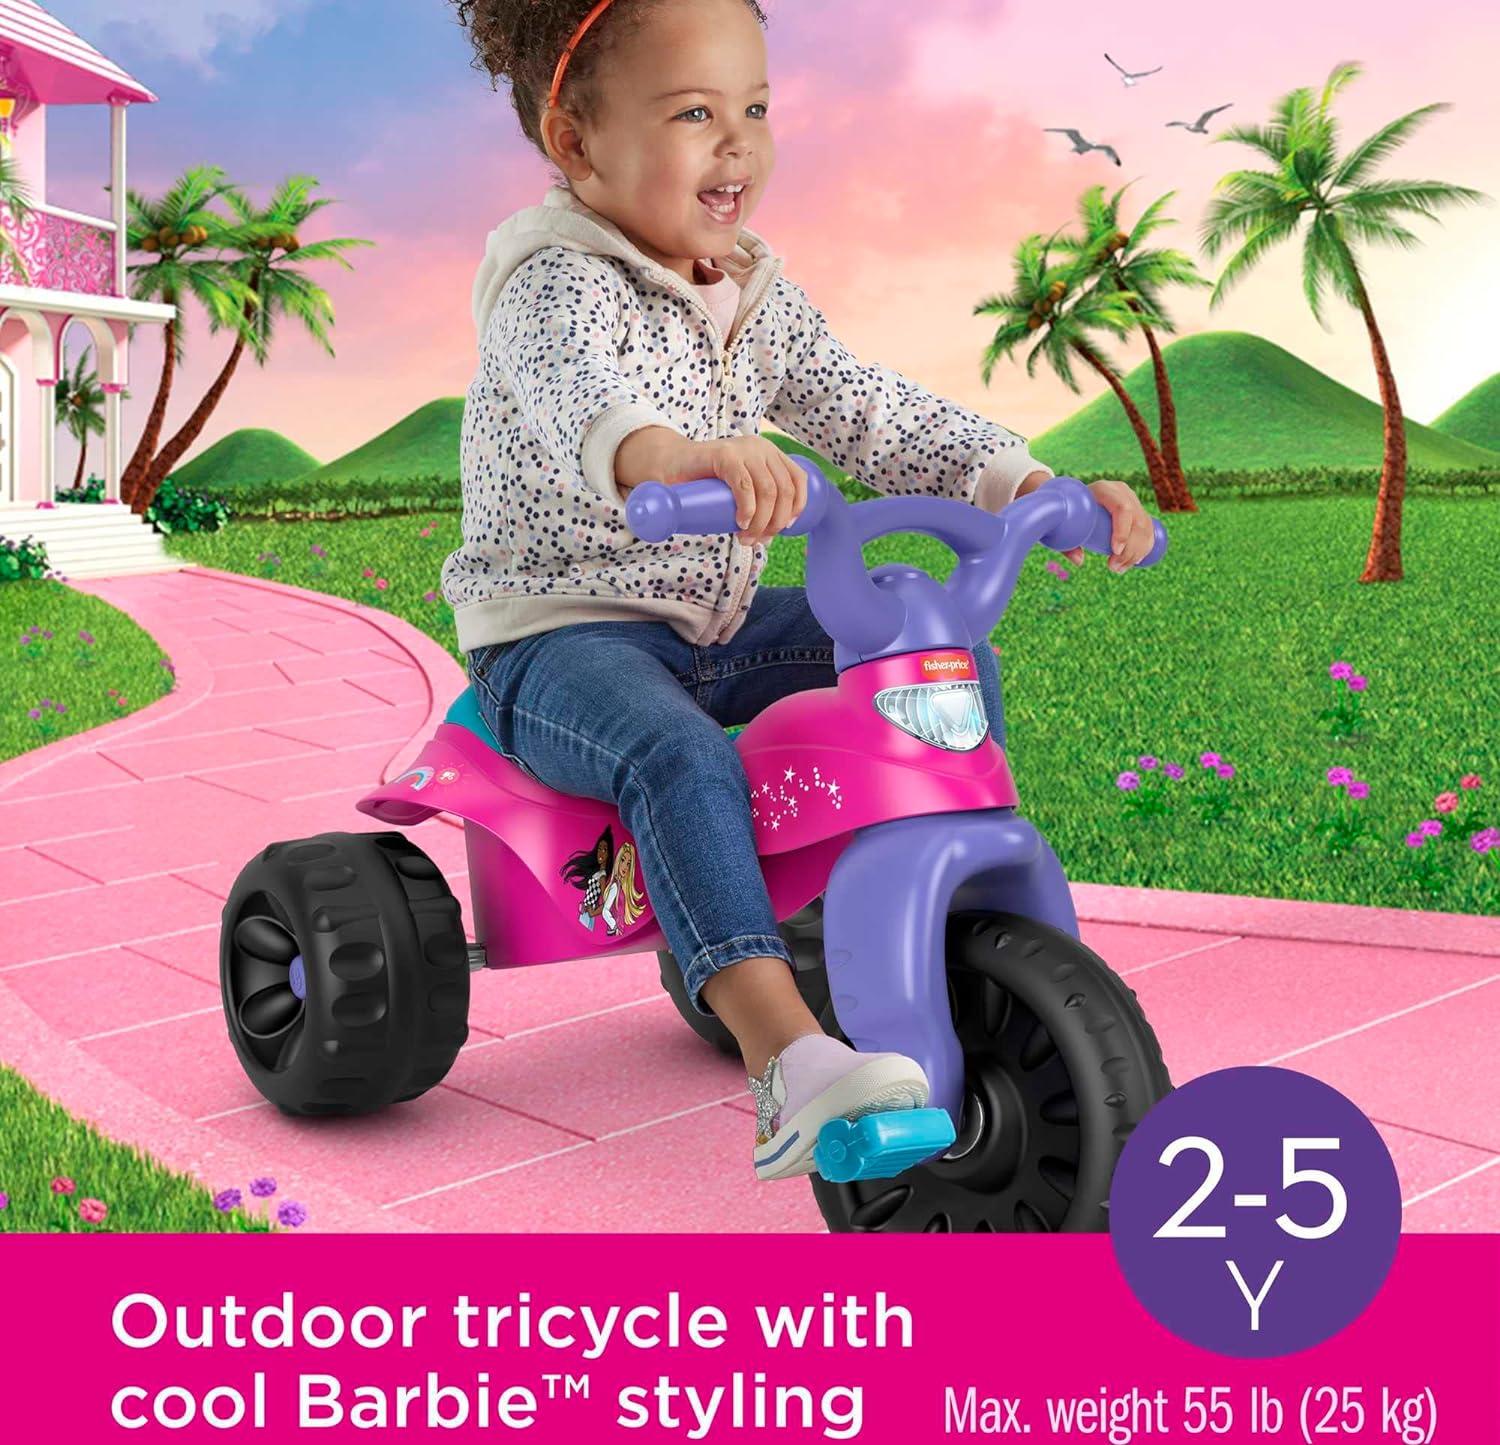 Fisher-Price Barbie Tricycle with Handlebar Grips and Storage Area, Multi-Terrain Tires, Tough Trike